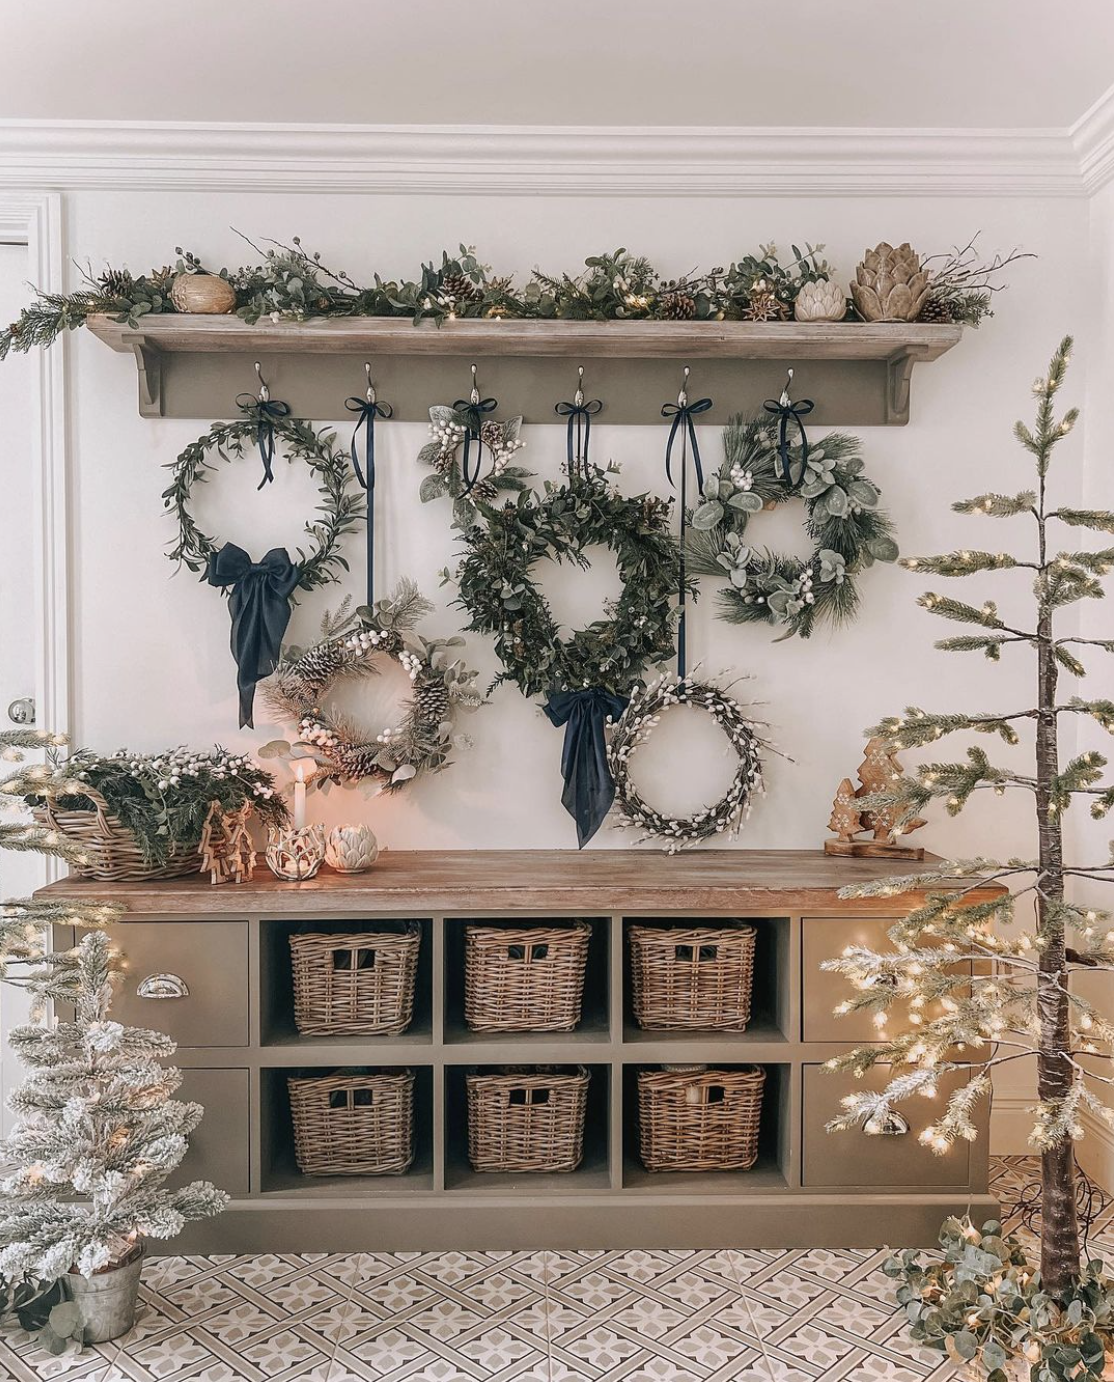 Fun idea to hang different kinds of Christmas wreaths together